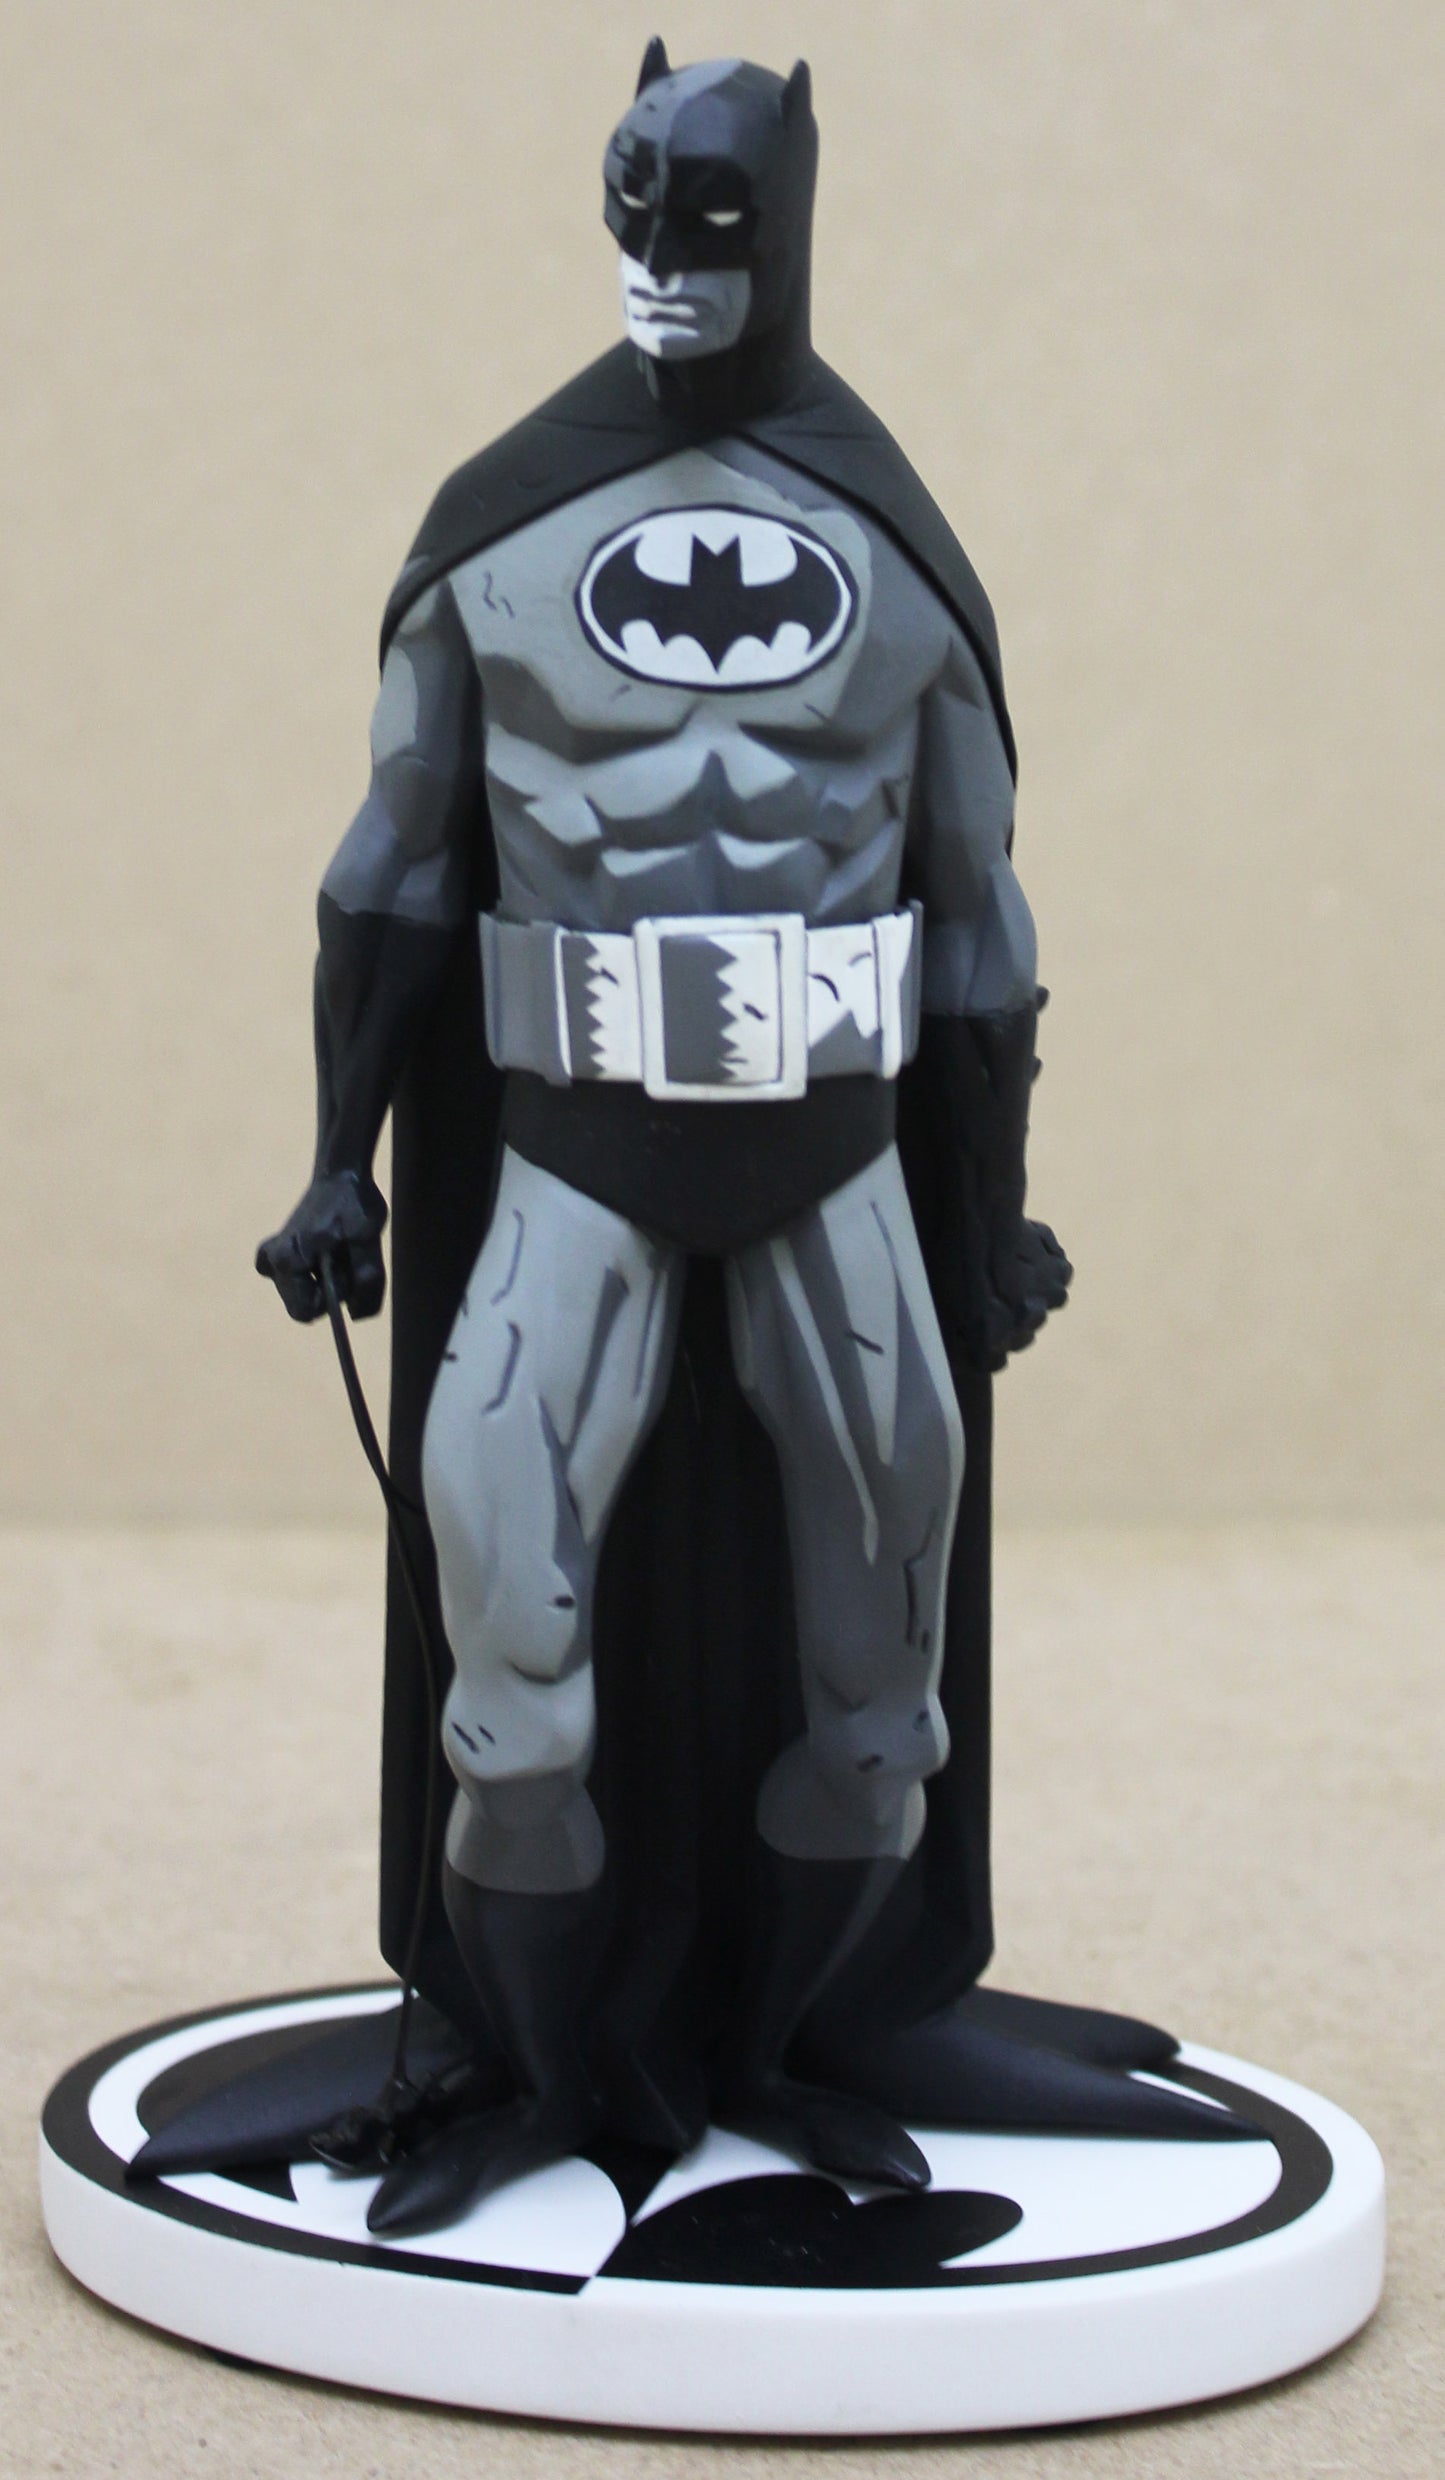 Batman Statue Black and White by Mike Mignola